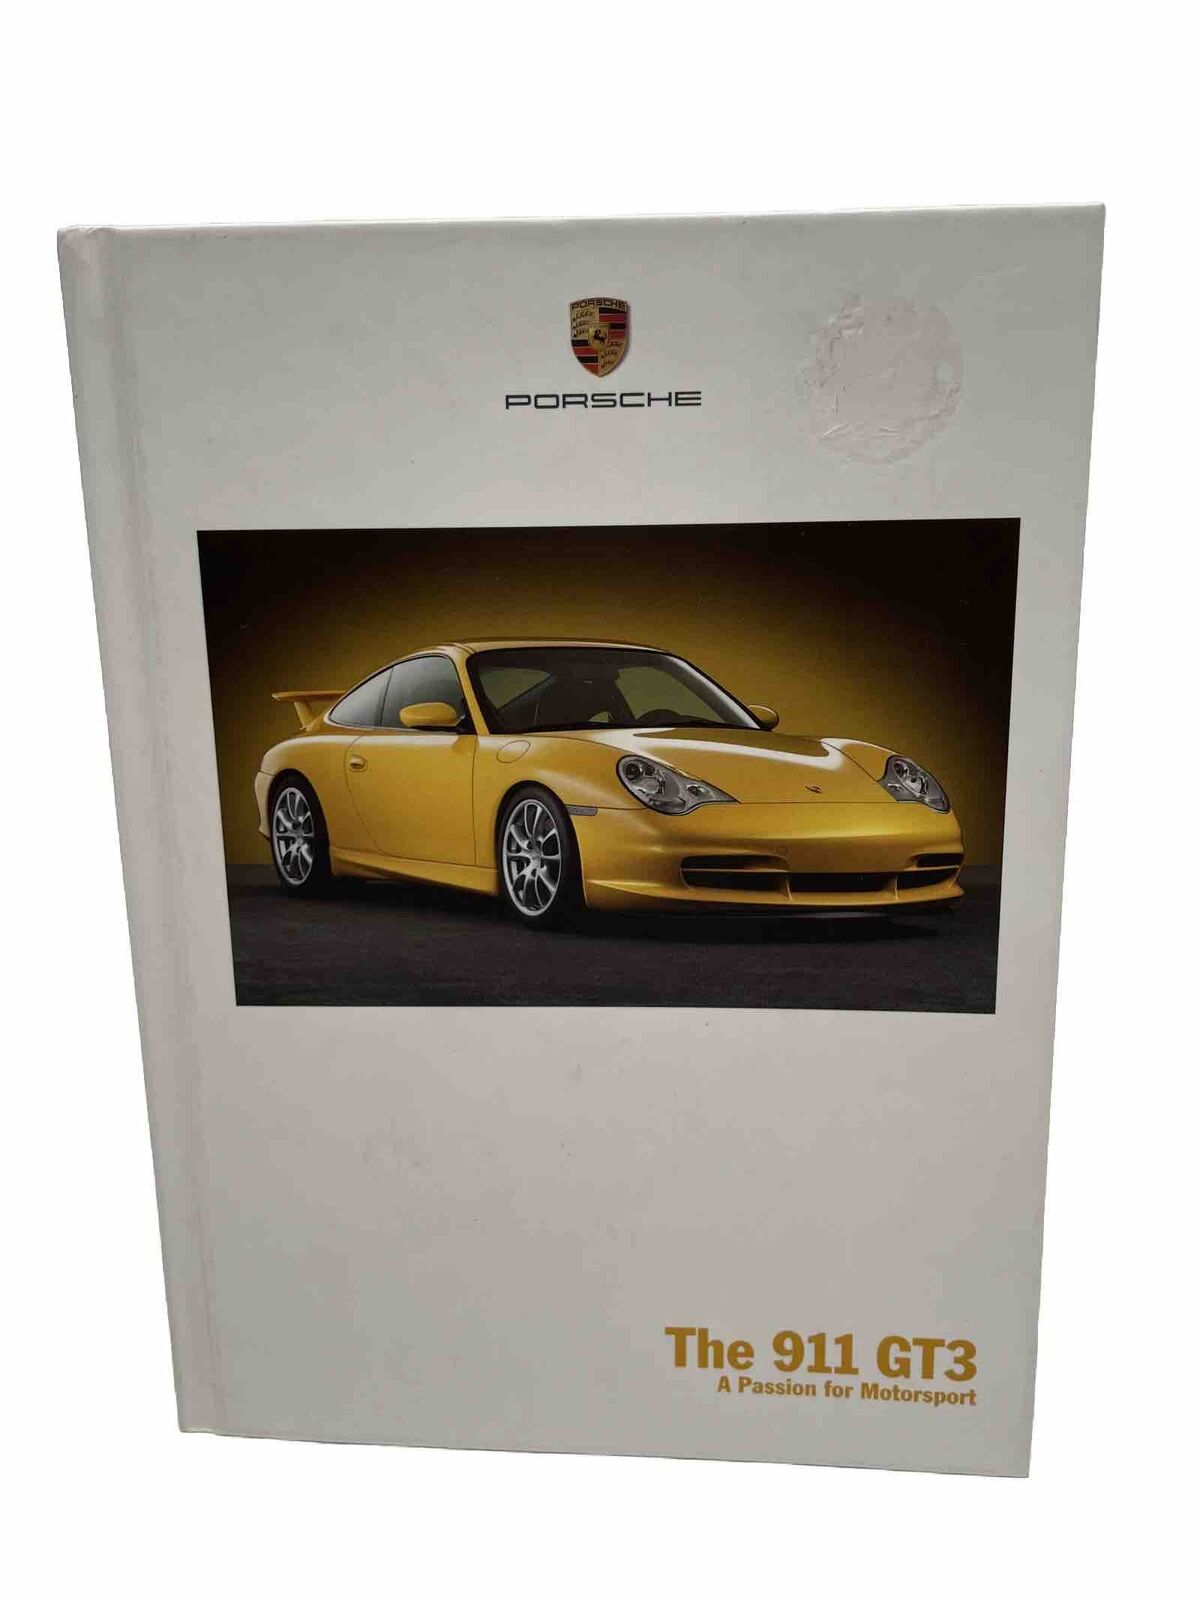 Porsche 996 The 911 GT3 A passion for motorsport Hardcover Brochure 12/02 Ed.